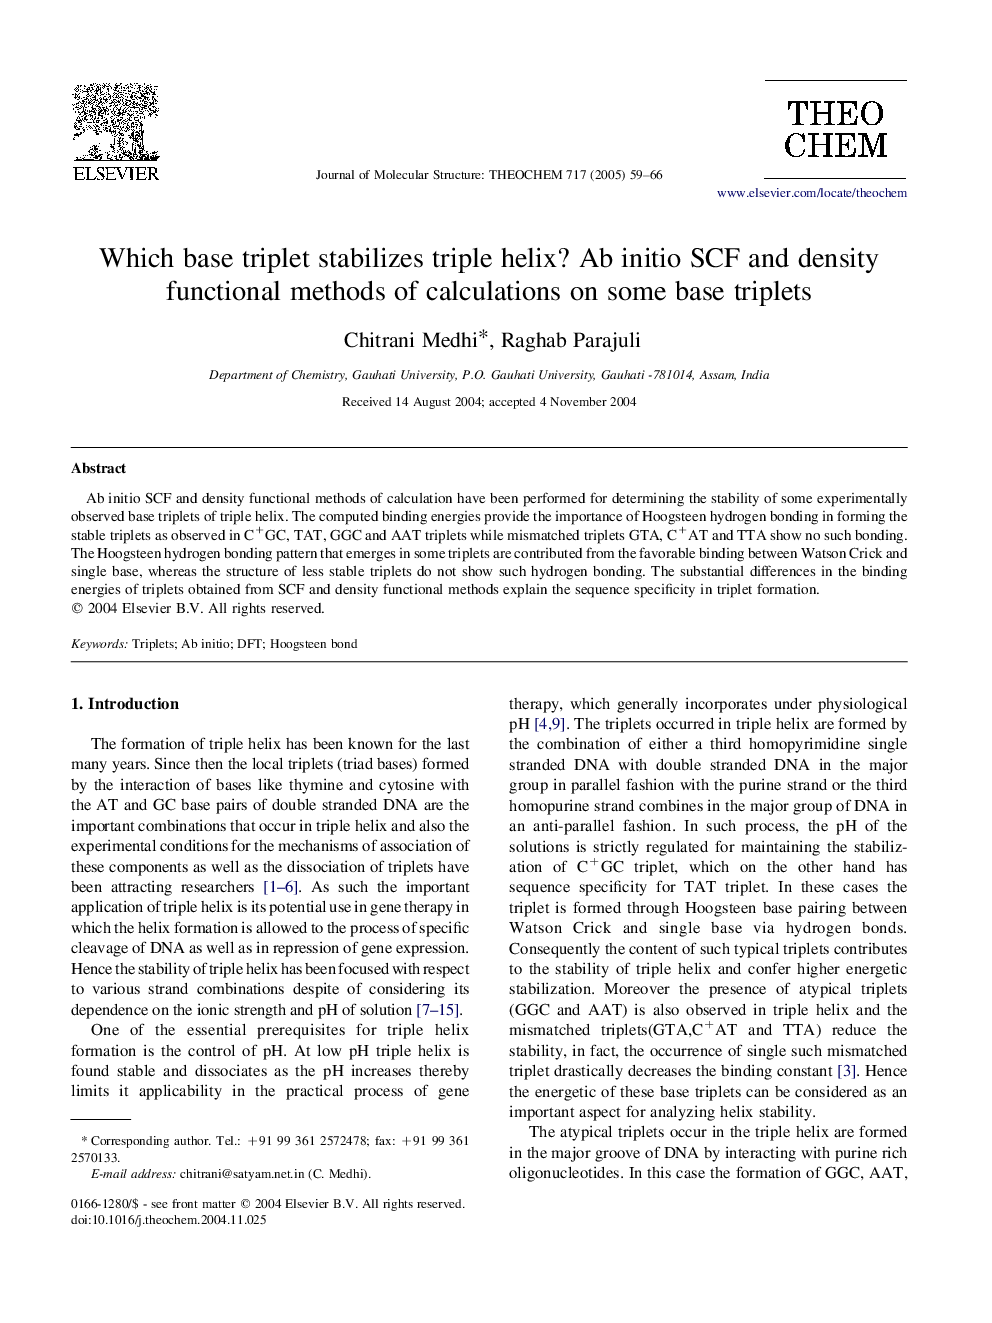 Which base triplet stabilizes triple helix? Ab initio SCF and density functional methods of calculations on some base triplets